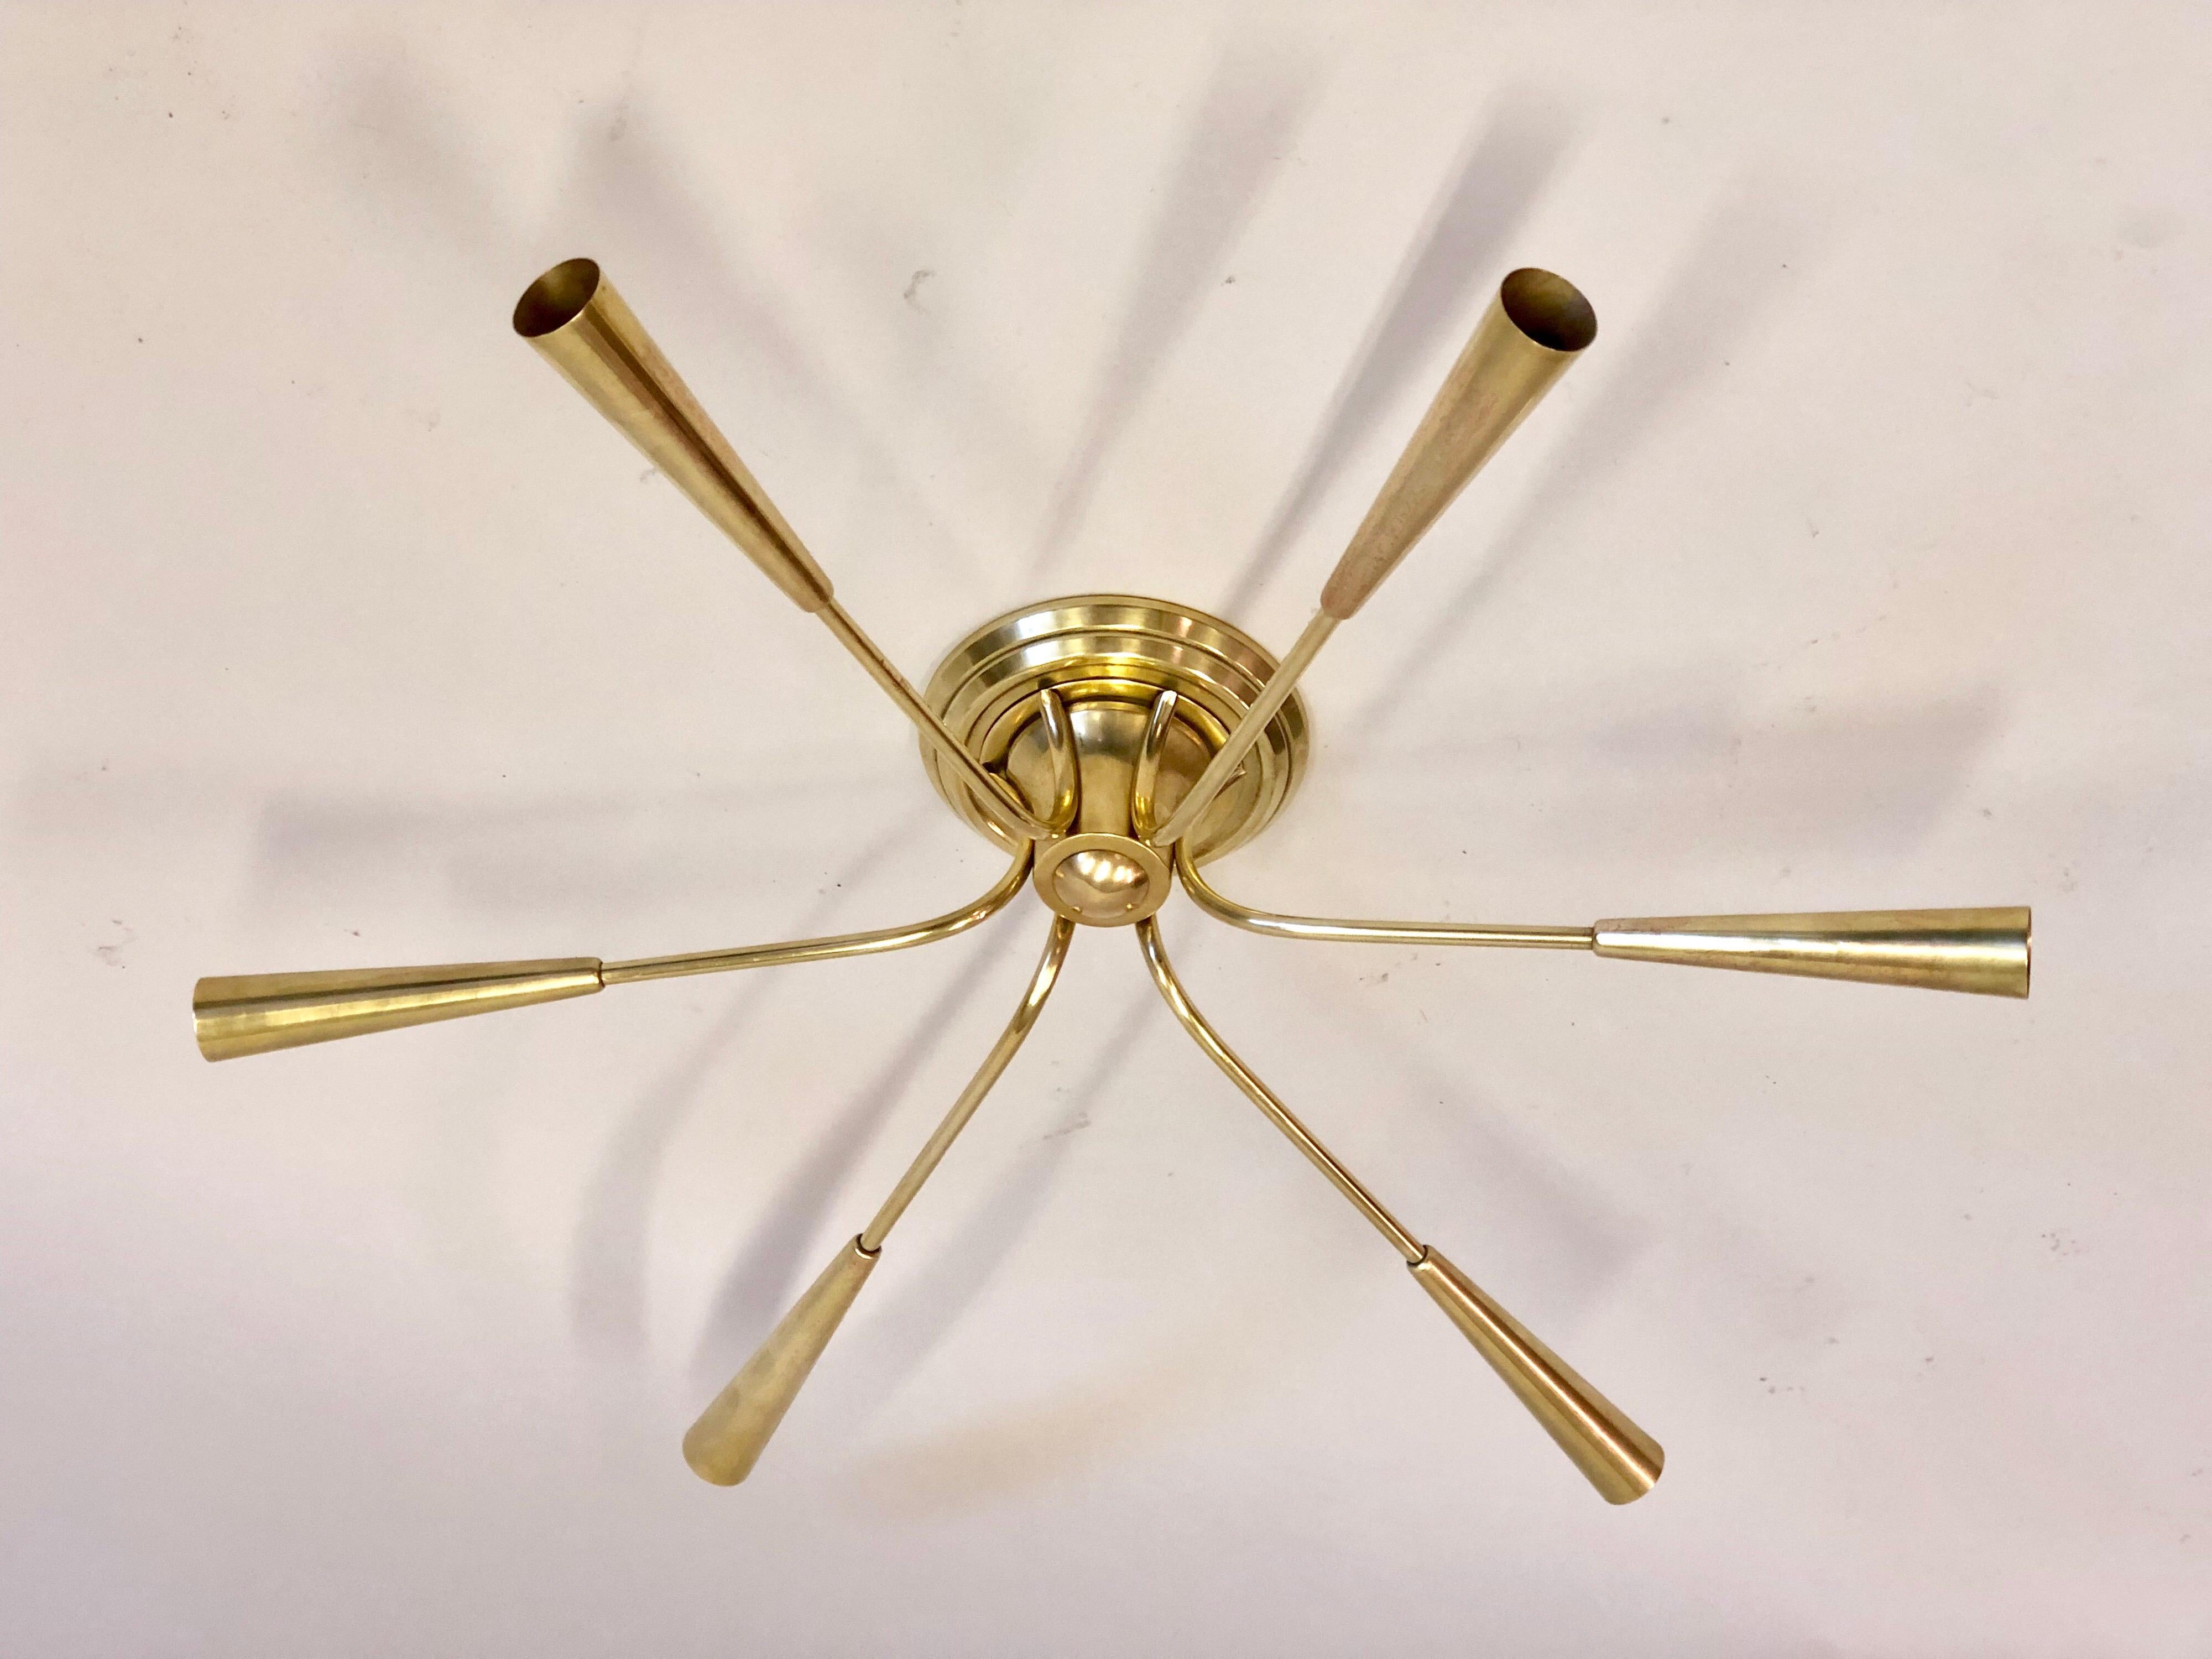 Elegant, sober Italian Mid-Century Modern solid brass flush mount fixture / chandelier by Stilnovo. The fixture has 6 lights with candelabra sockets and is in the form of sunburst, star, Sputnik or compass.